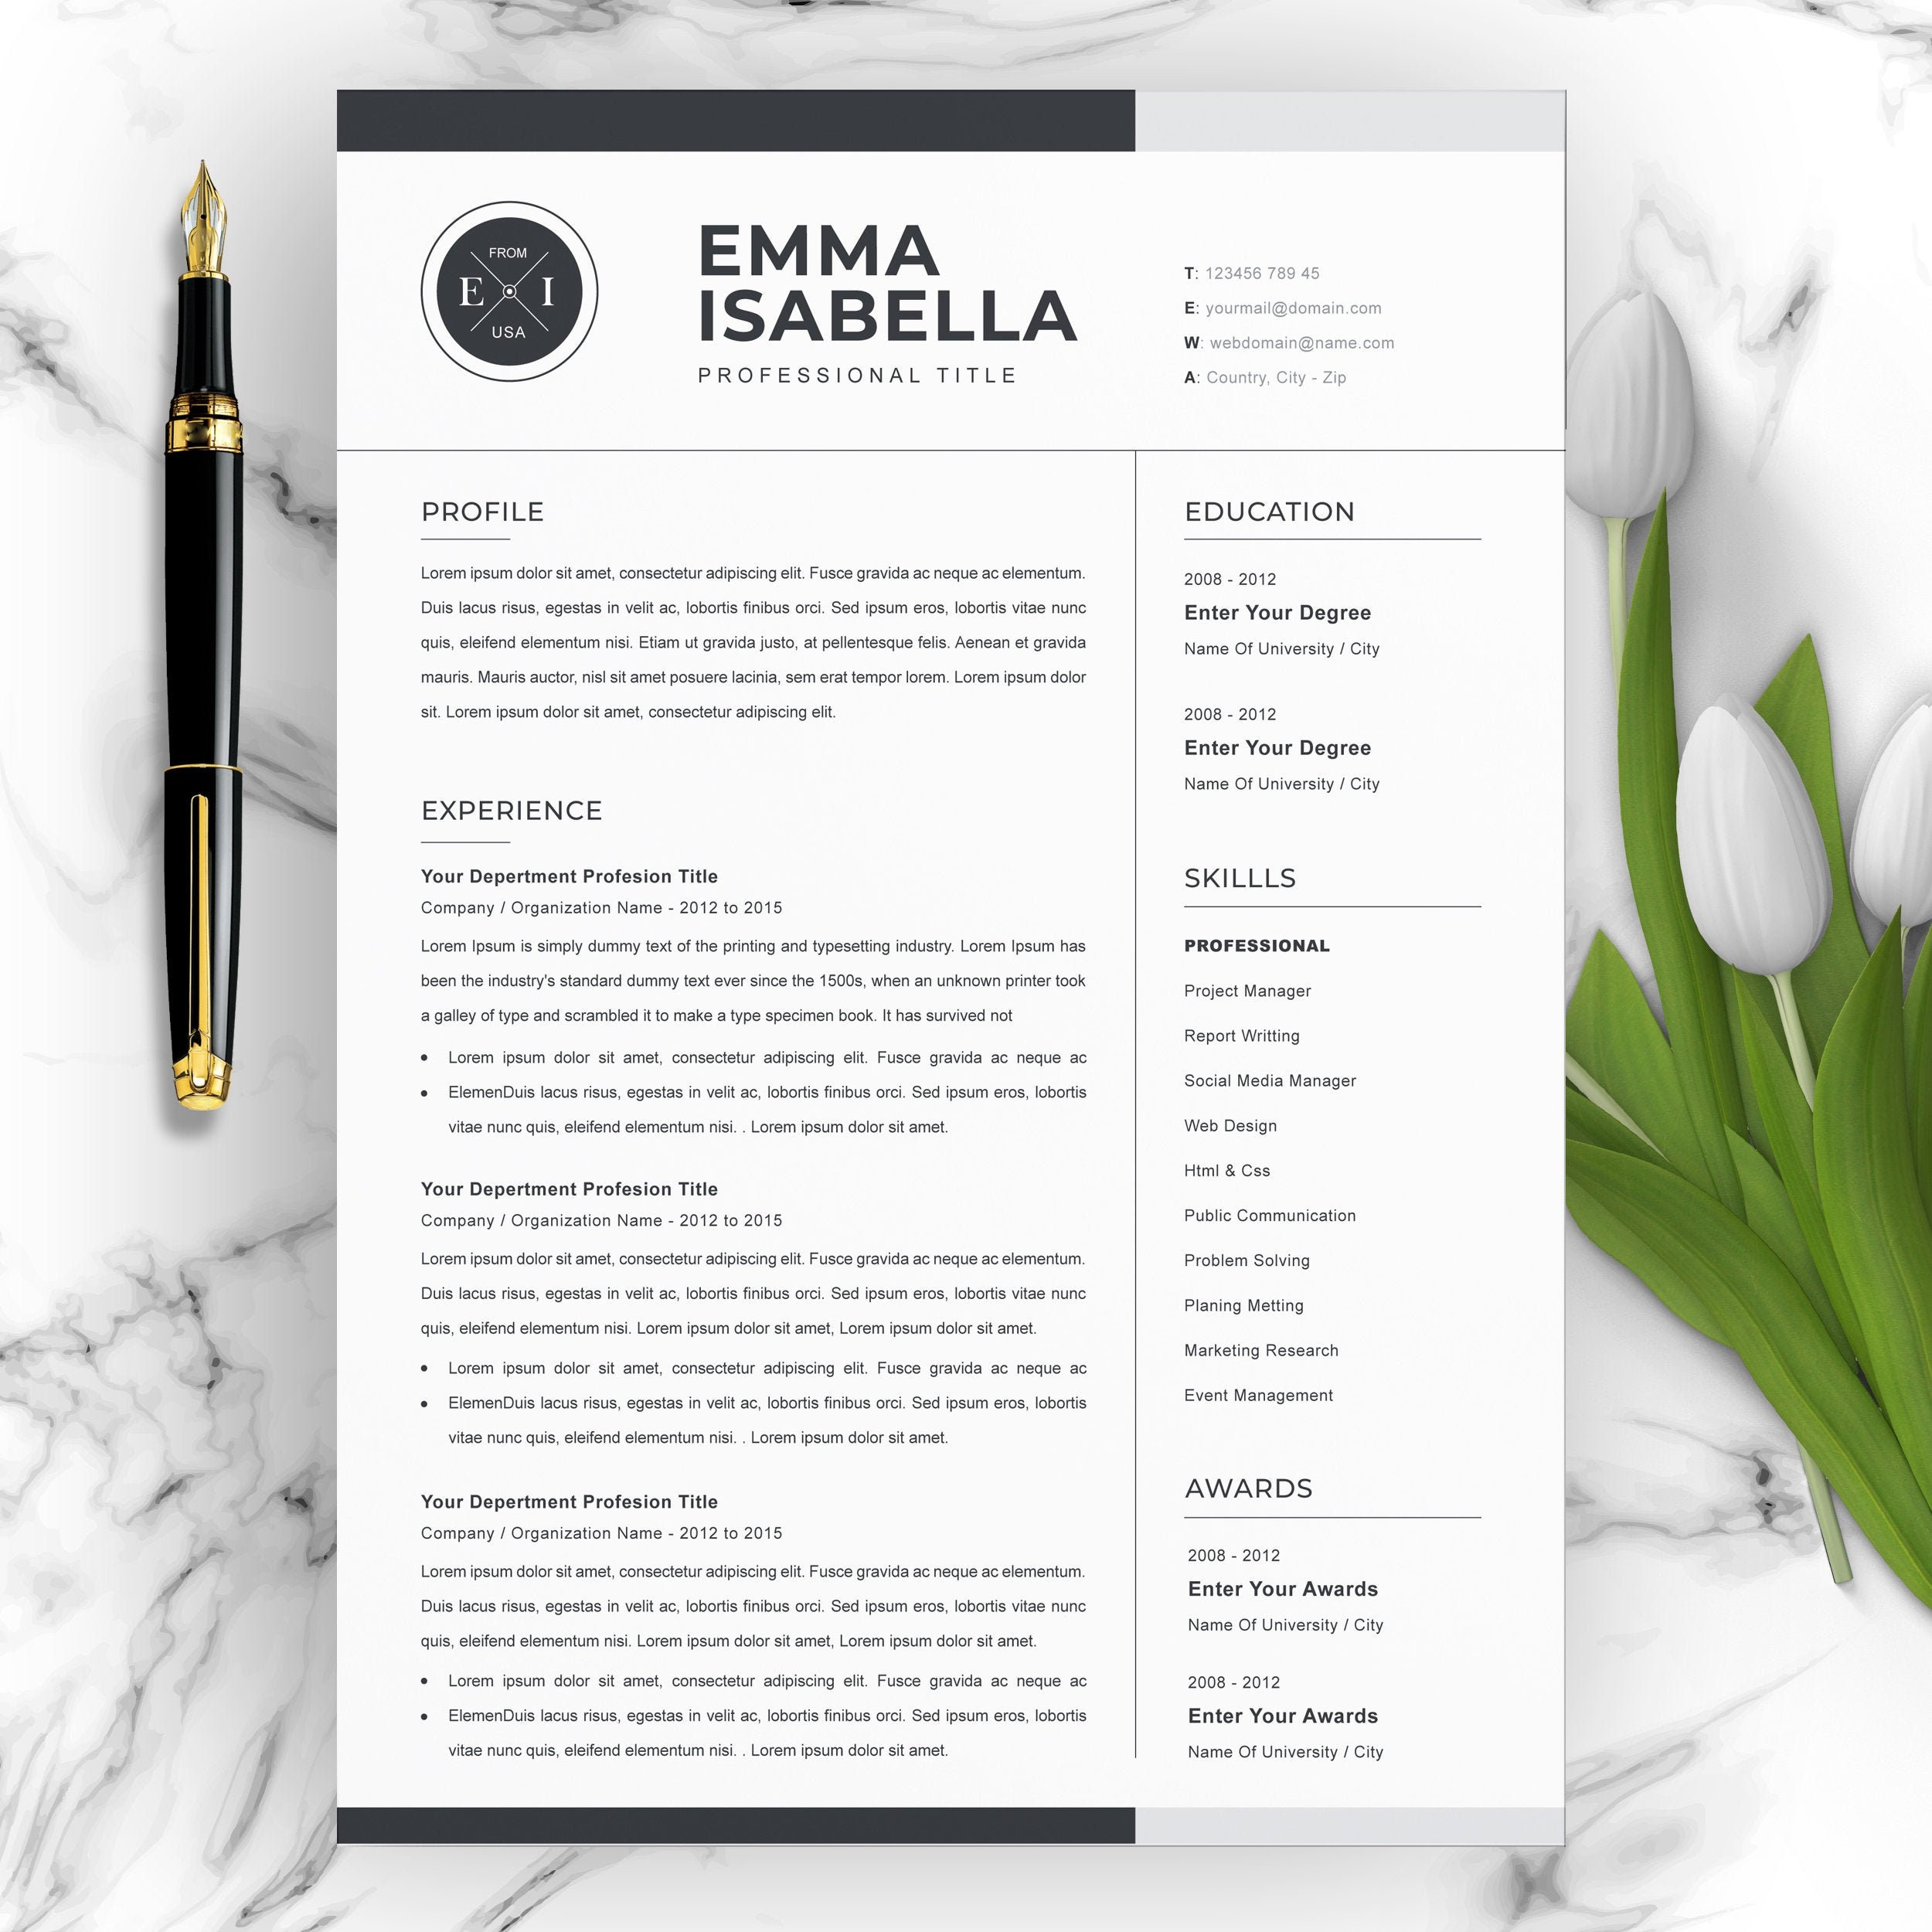 ats-friendly-resume-template-for-word-pages-indesign-resume-etsy